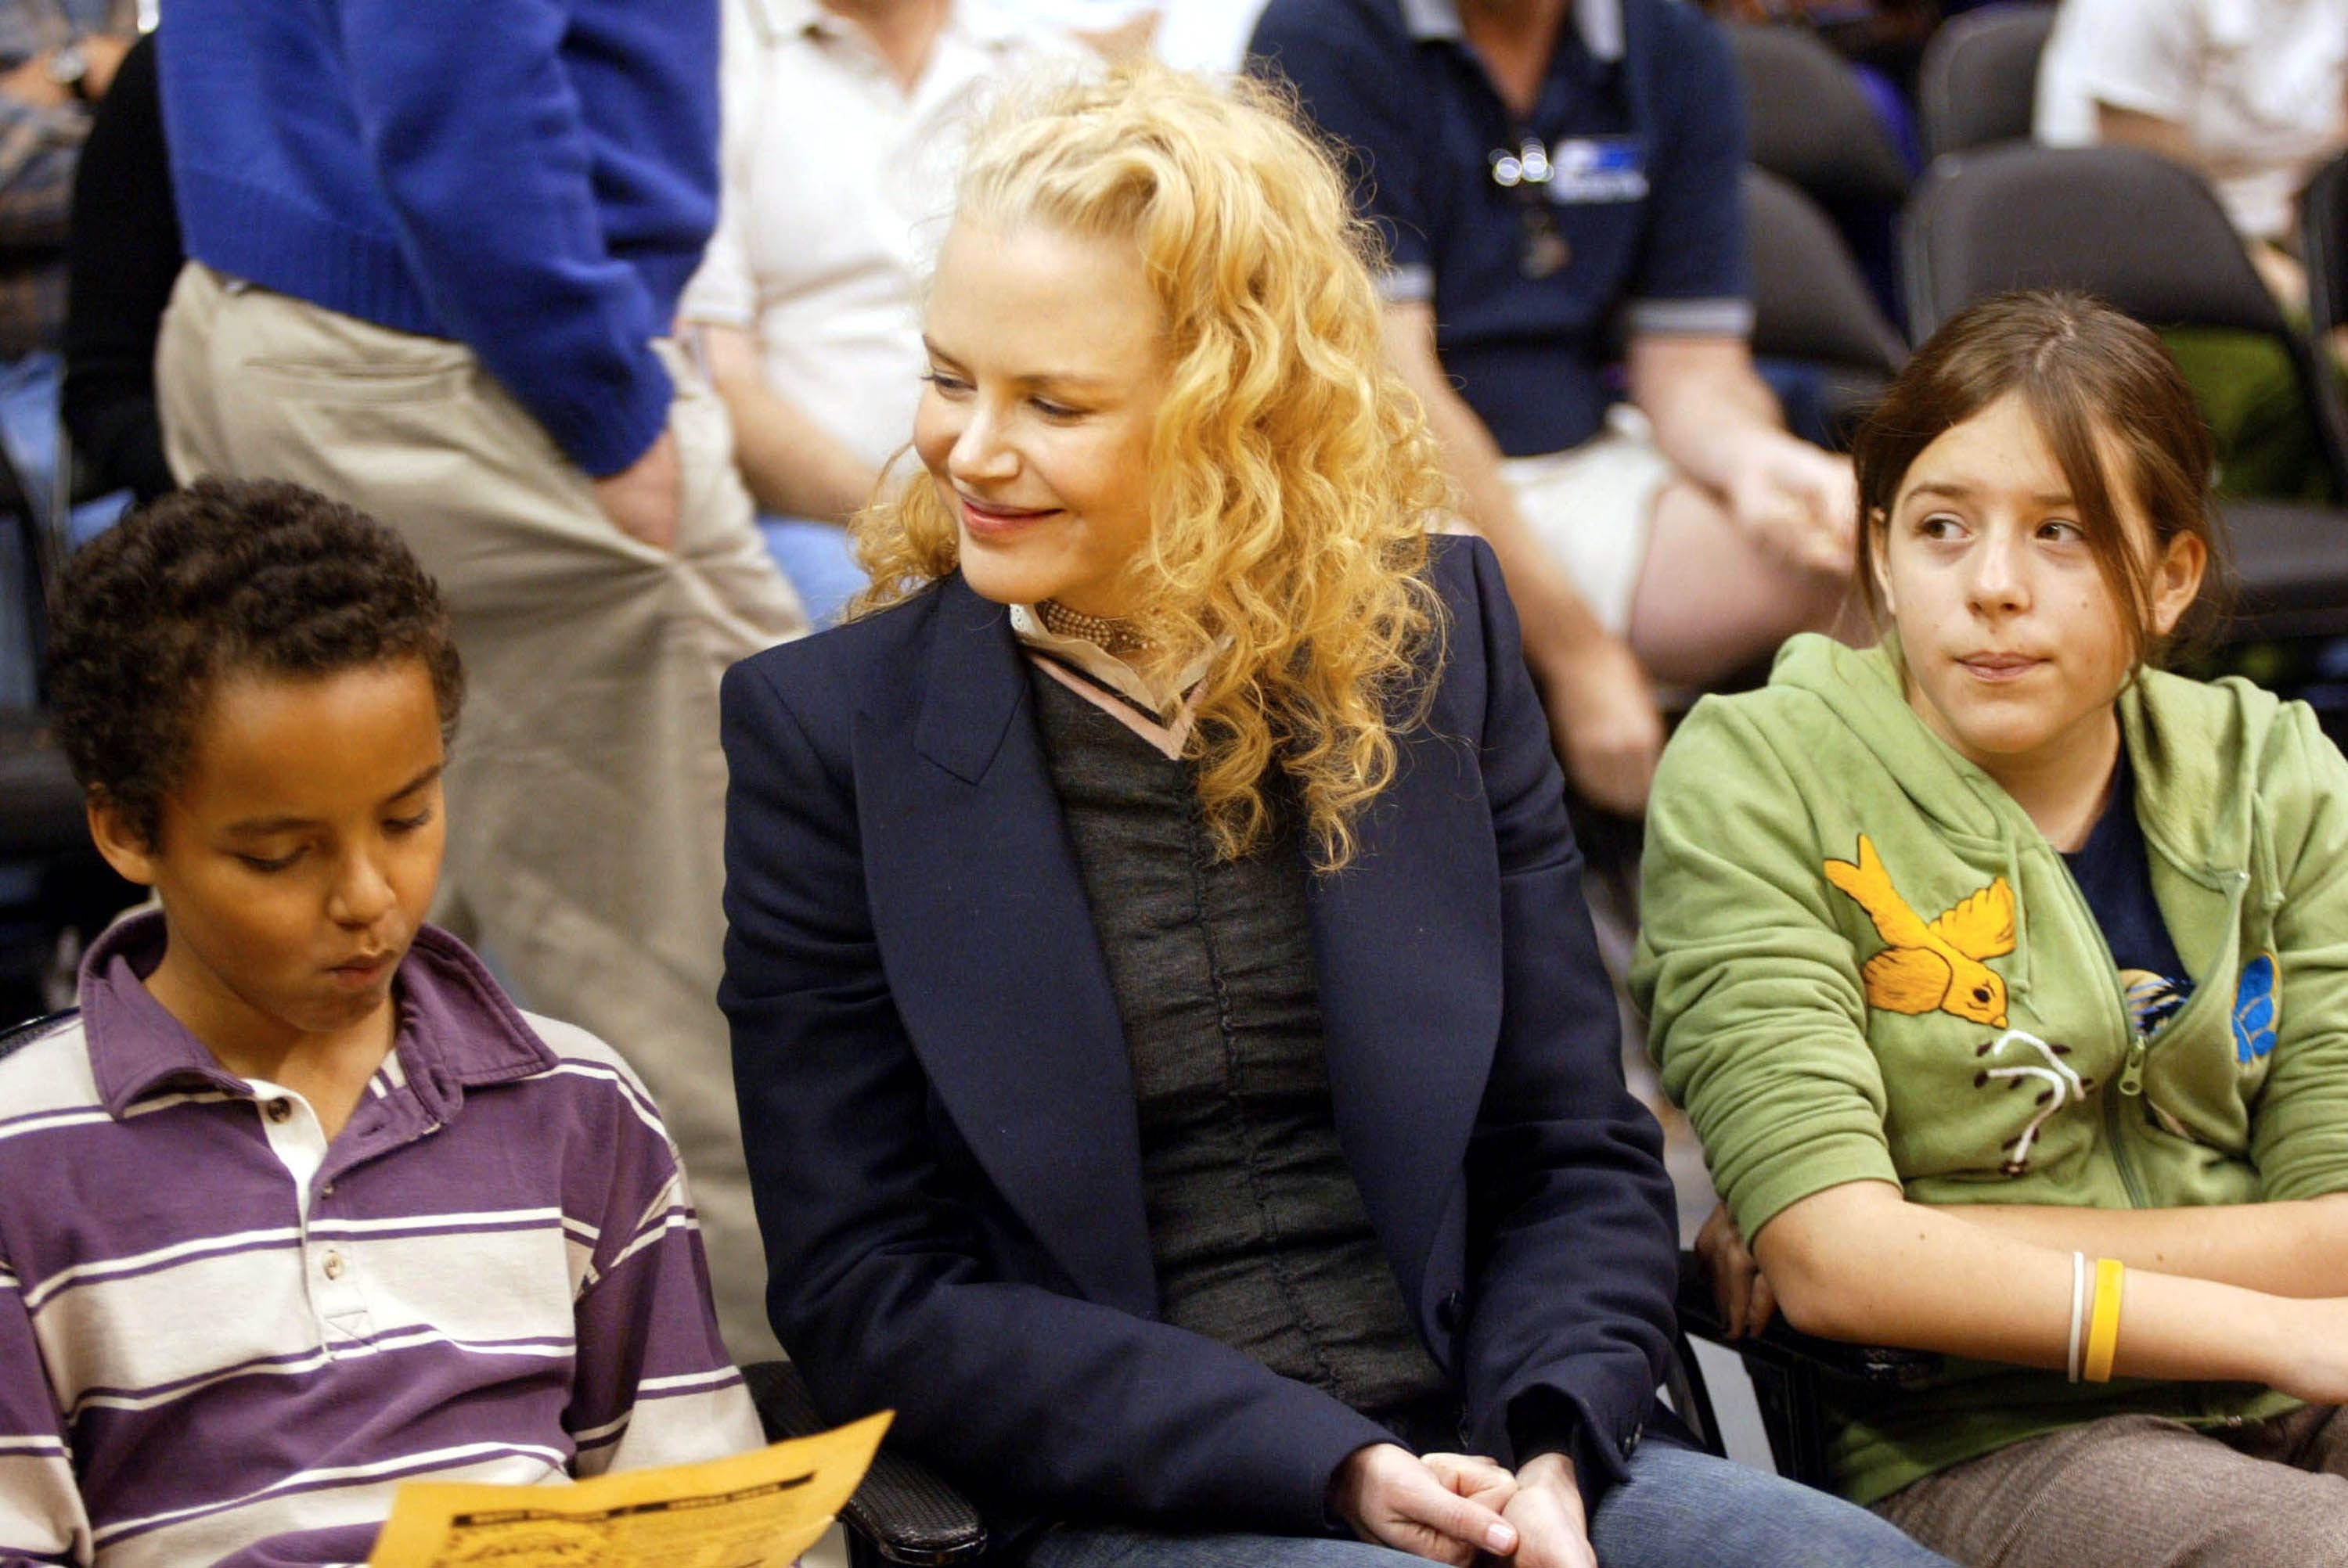 Nicole Kidman and her children Connor and Isabella at a basketball game on December 25, 2004, in Los Angeles, California. | Source: Matthew Simmons/Getty Images